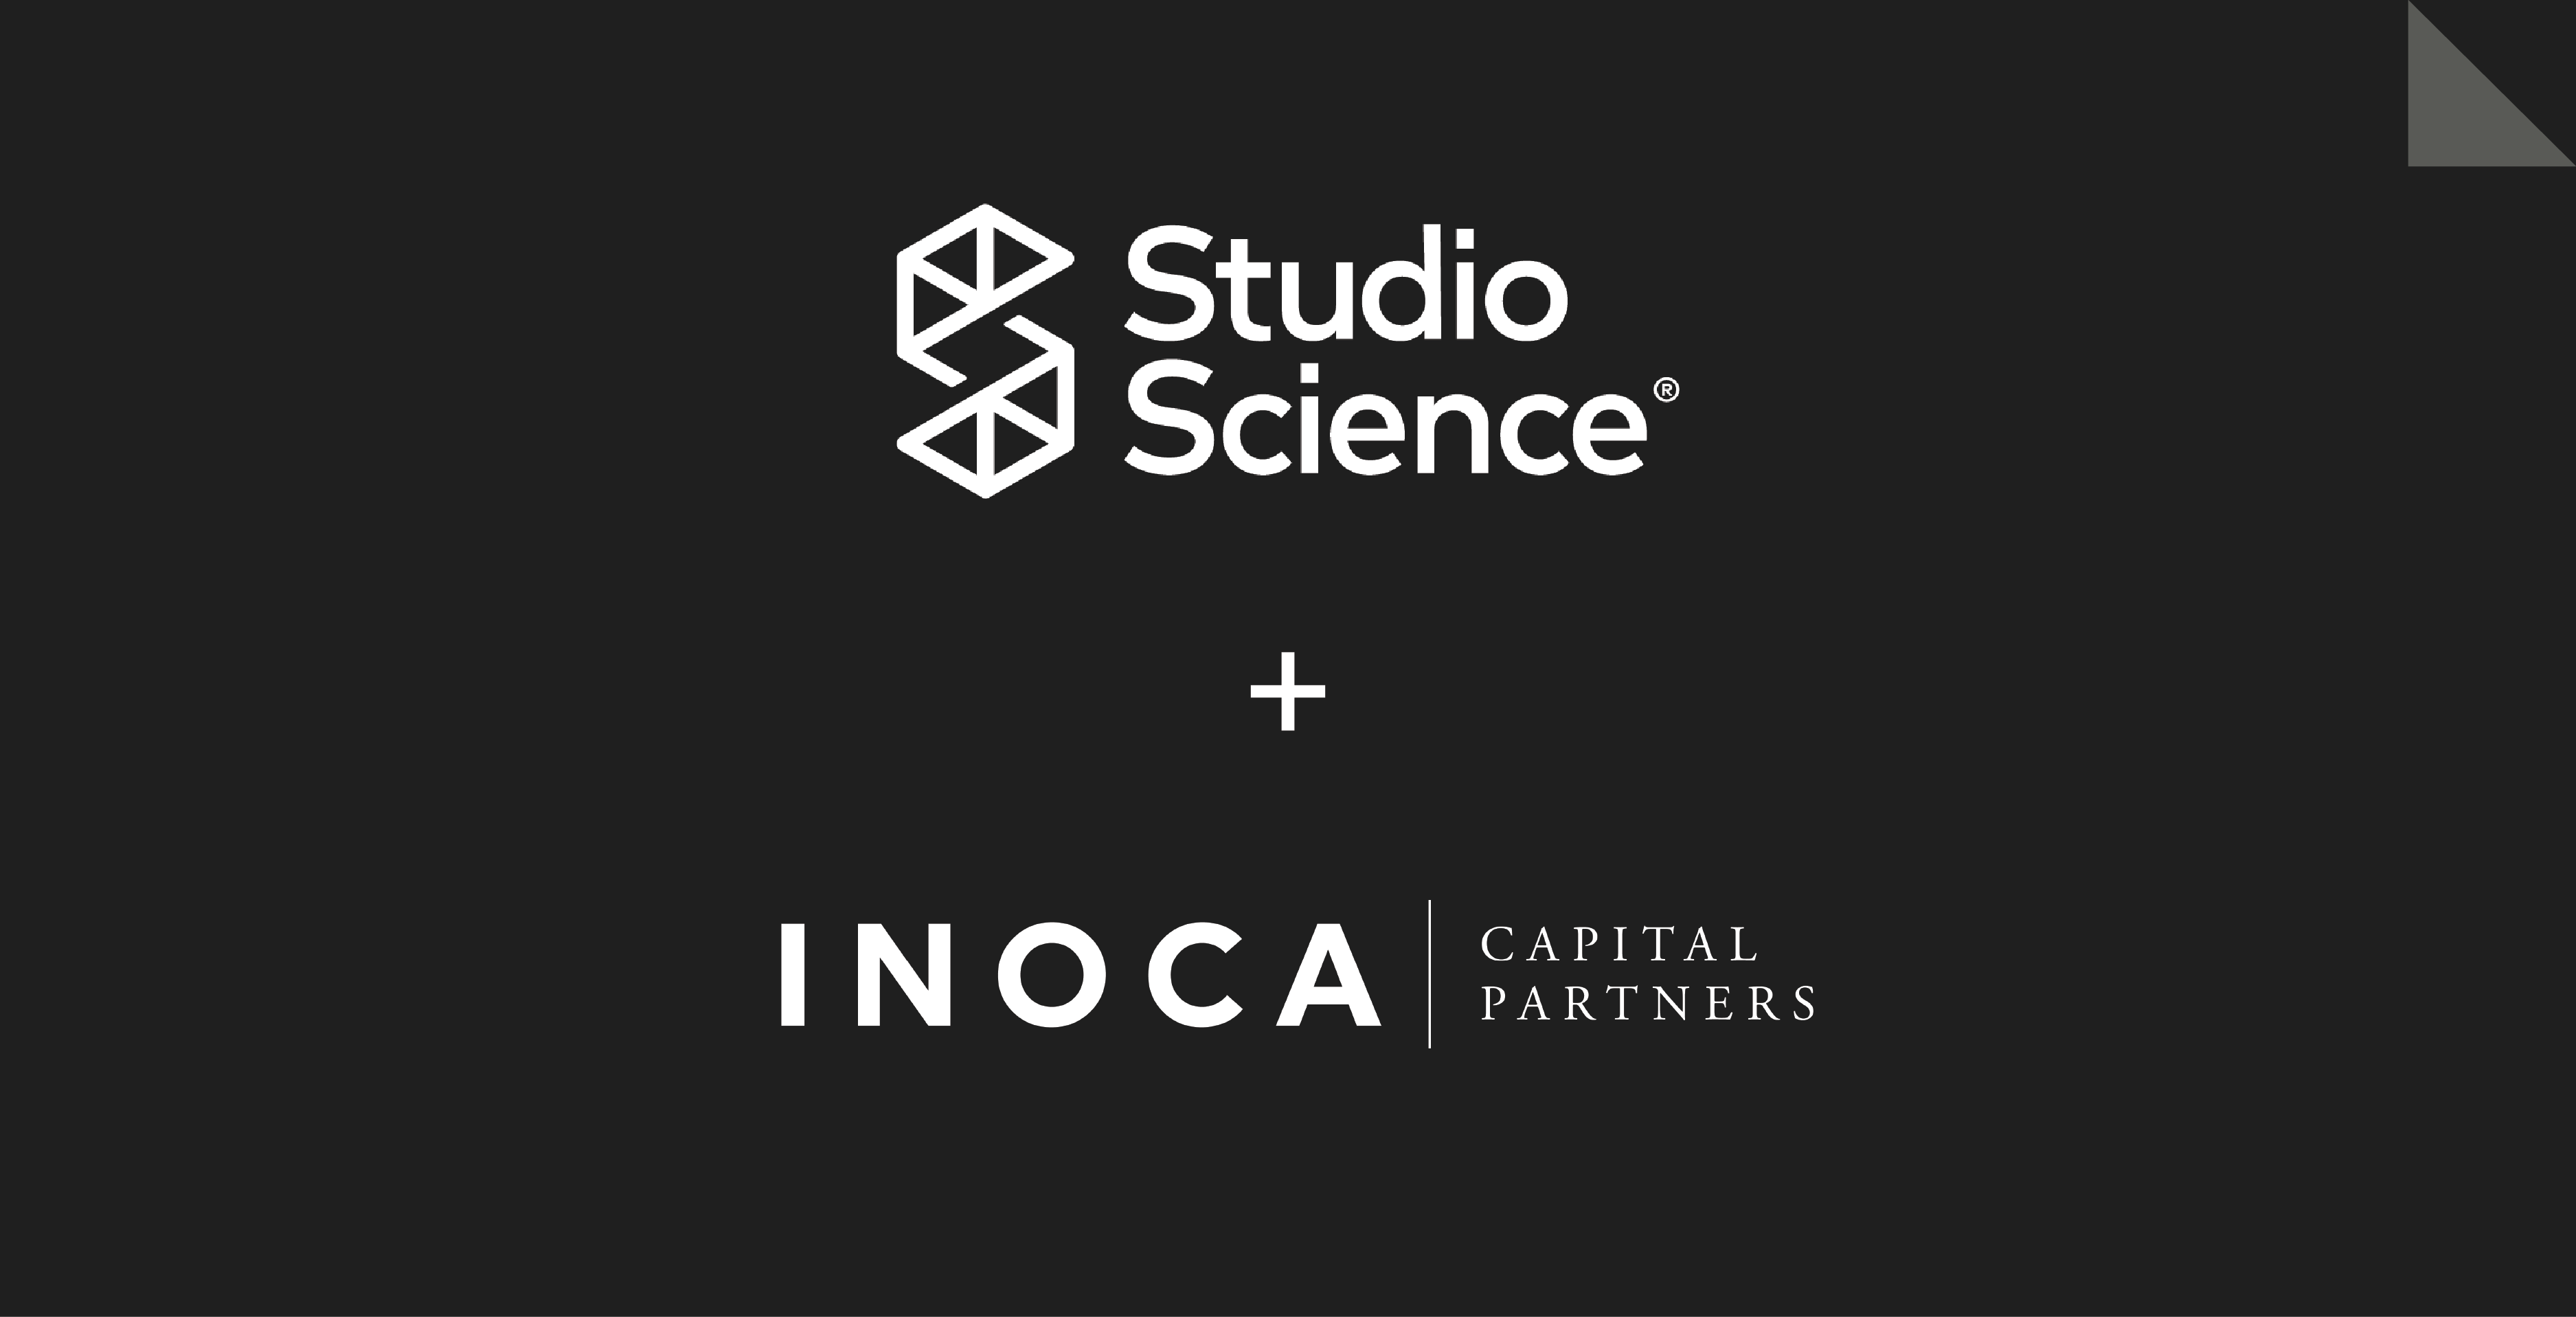 STUDIO SCIENCE ANNOUNCES STRATEGIC GROWTH INVESTMENT FROM INOCA CAPITAL PARTNERS